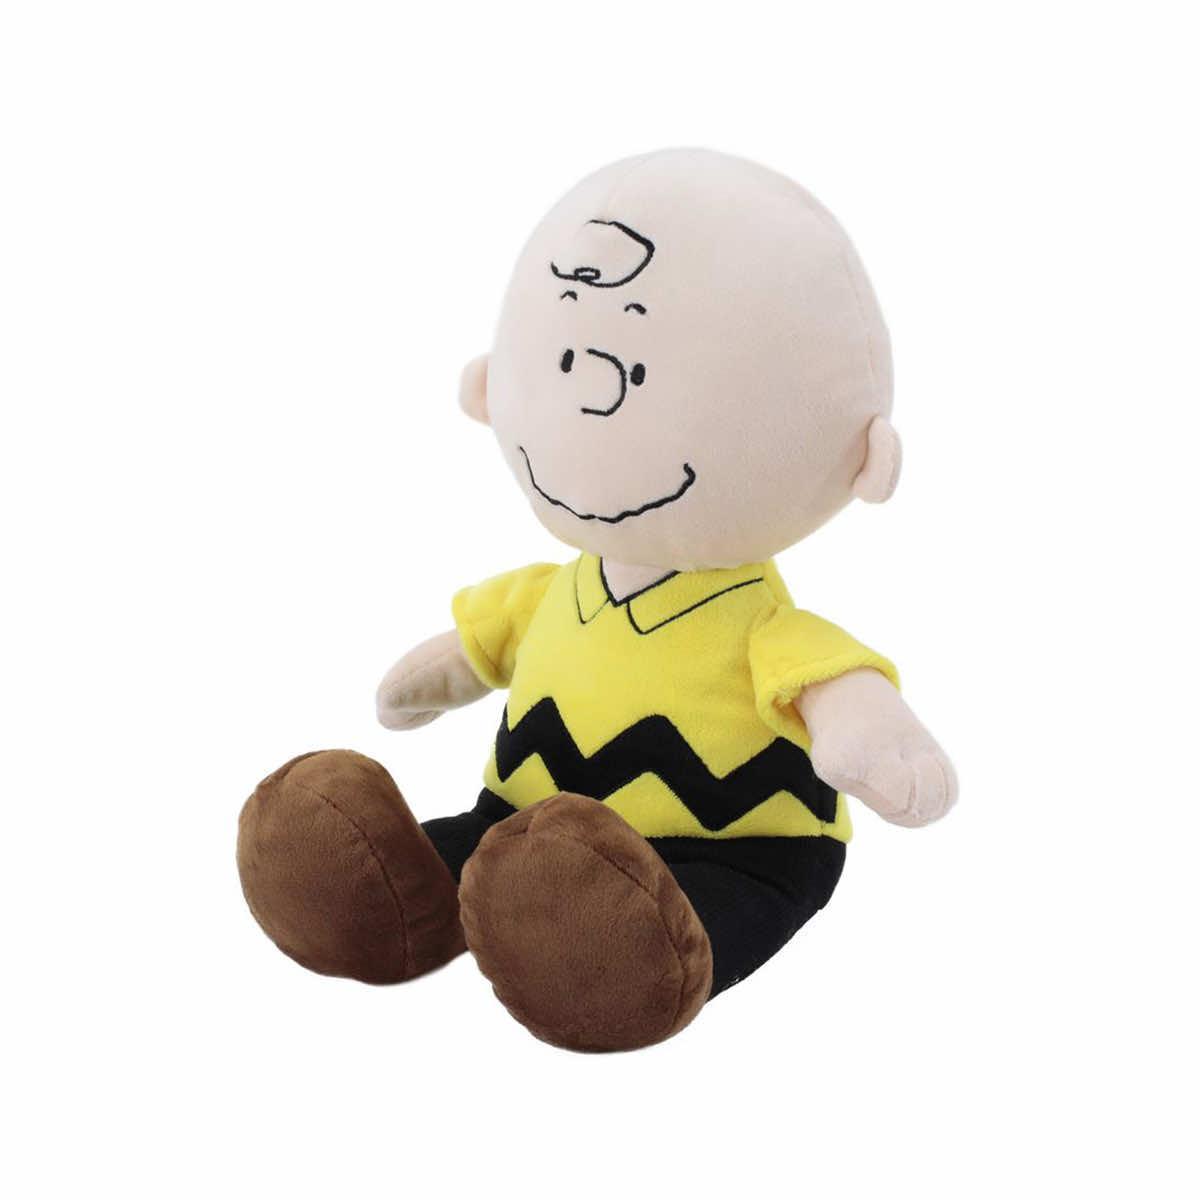 Peanuts Snoopy Many Faces of Snoopy Plush